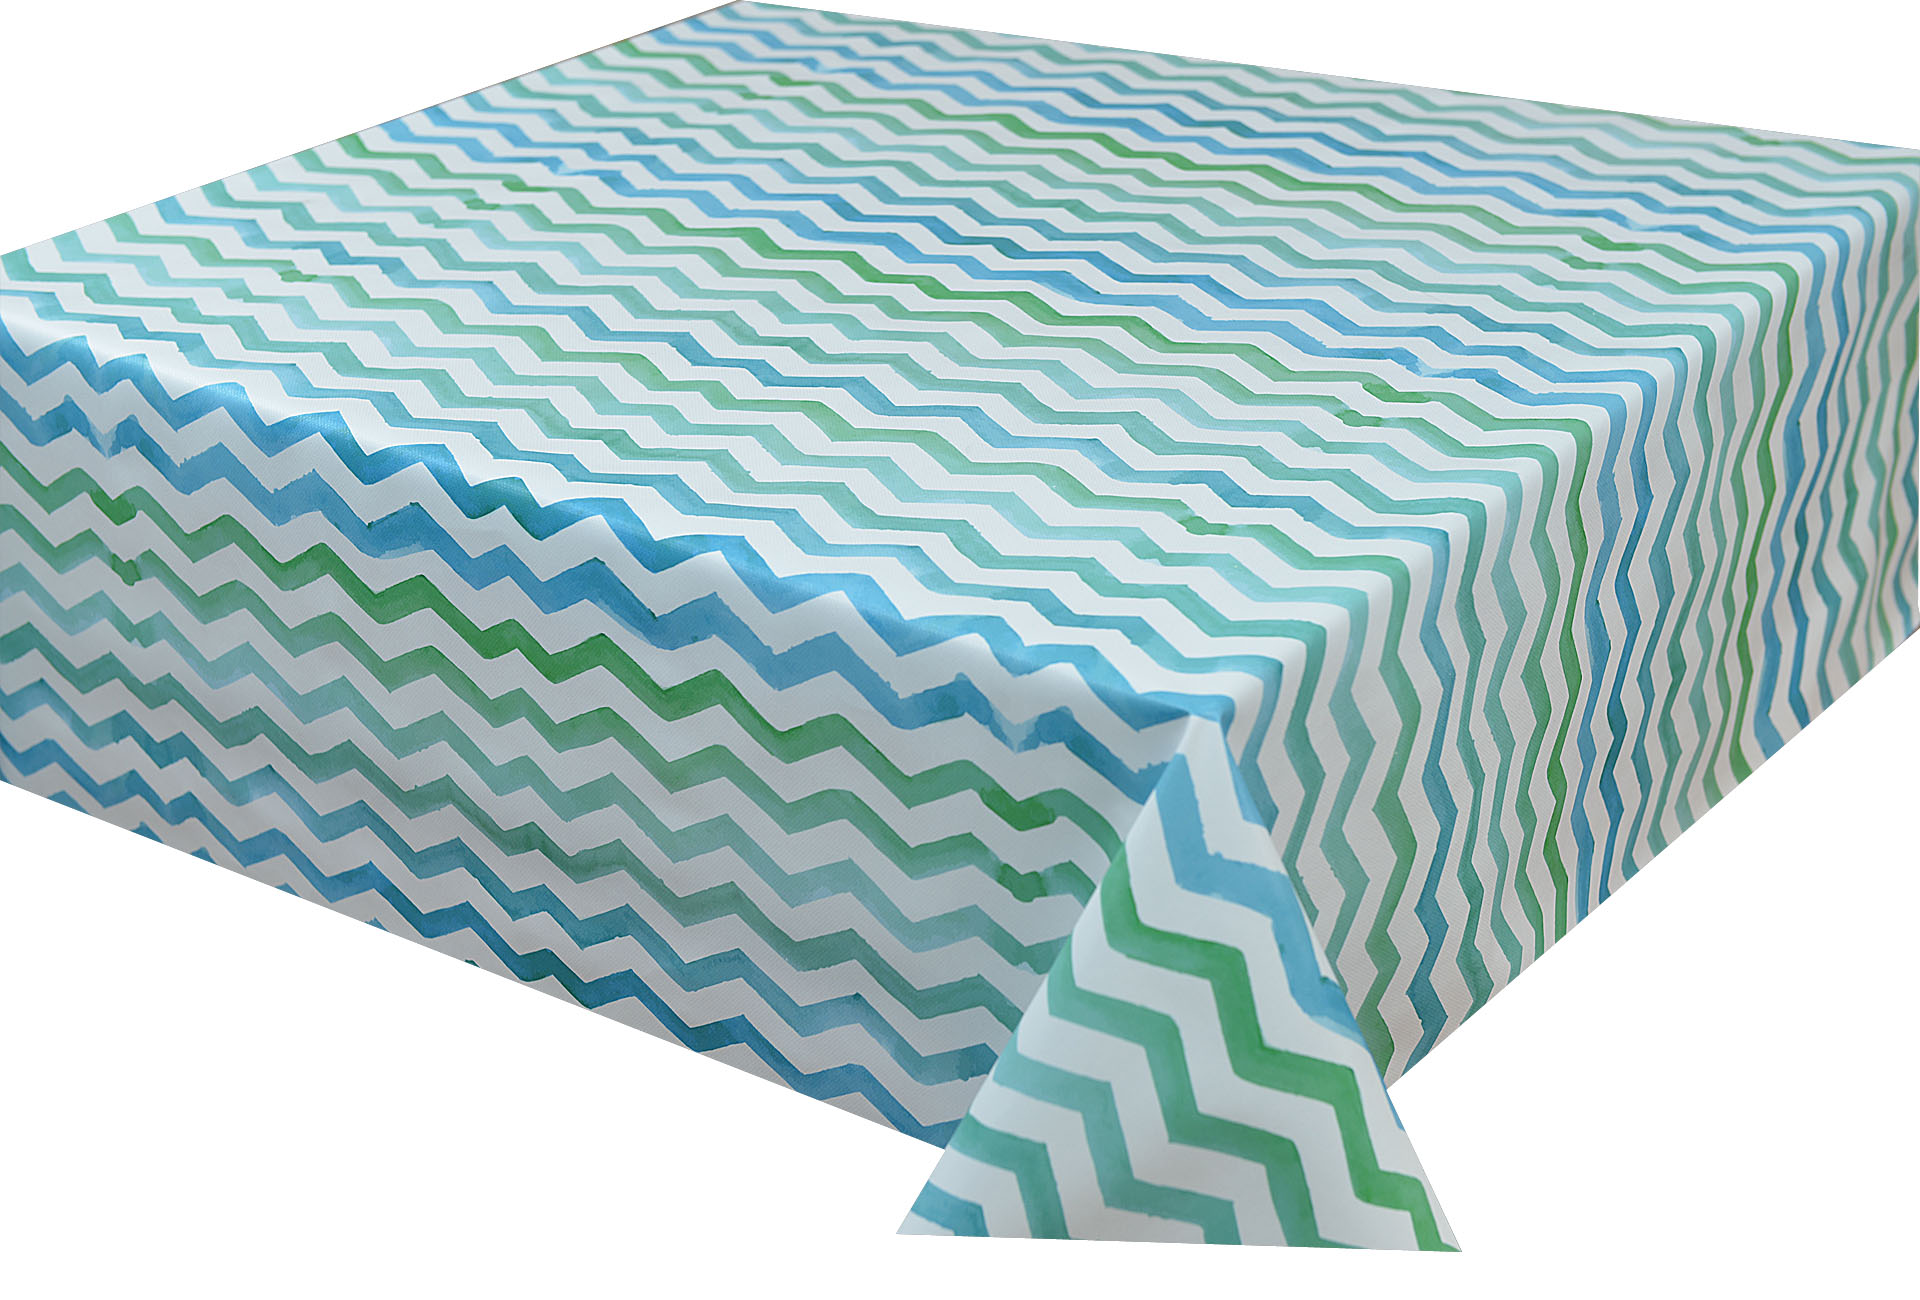 Table Cover - Printed Table Cover - Europe Design Table Cover - BS-EN8034